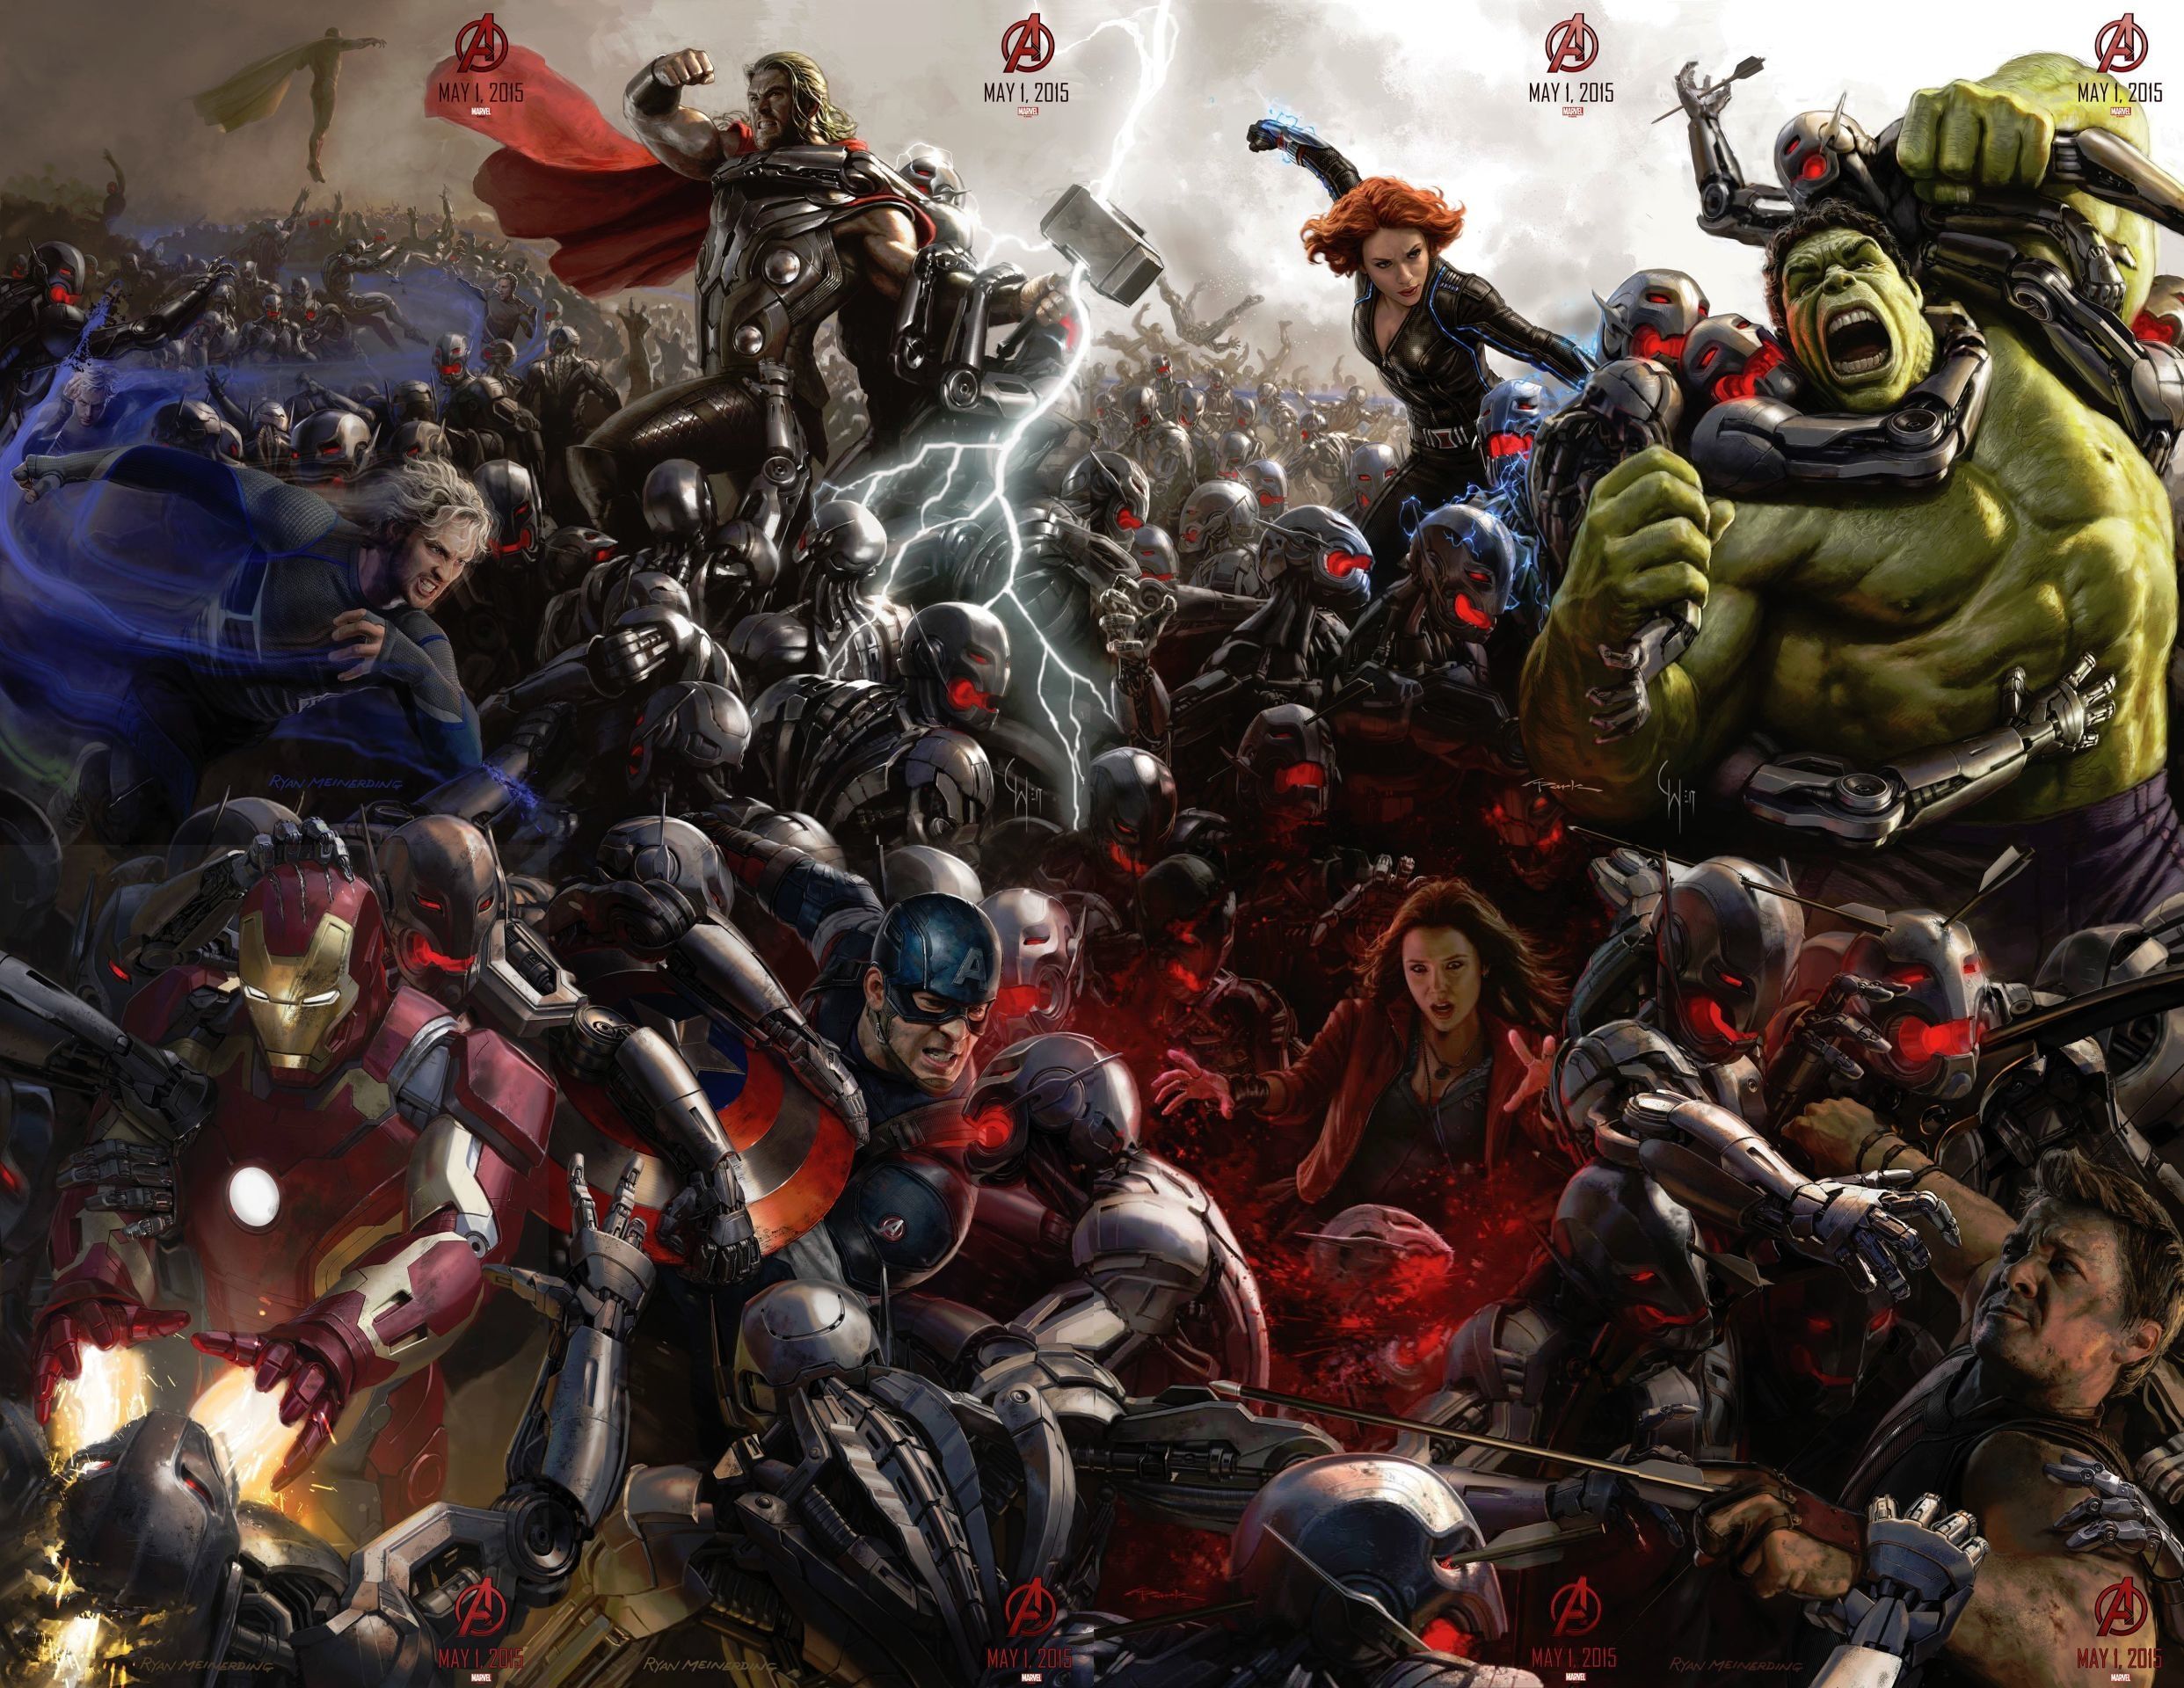 Avengers: Age of Ultron Concept Art Poster Revealed